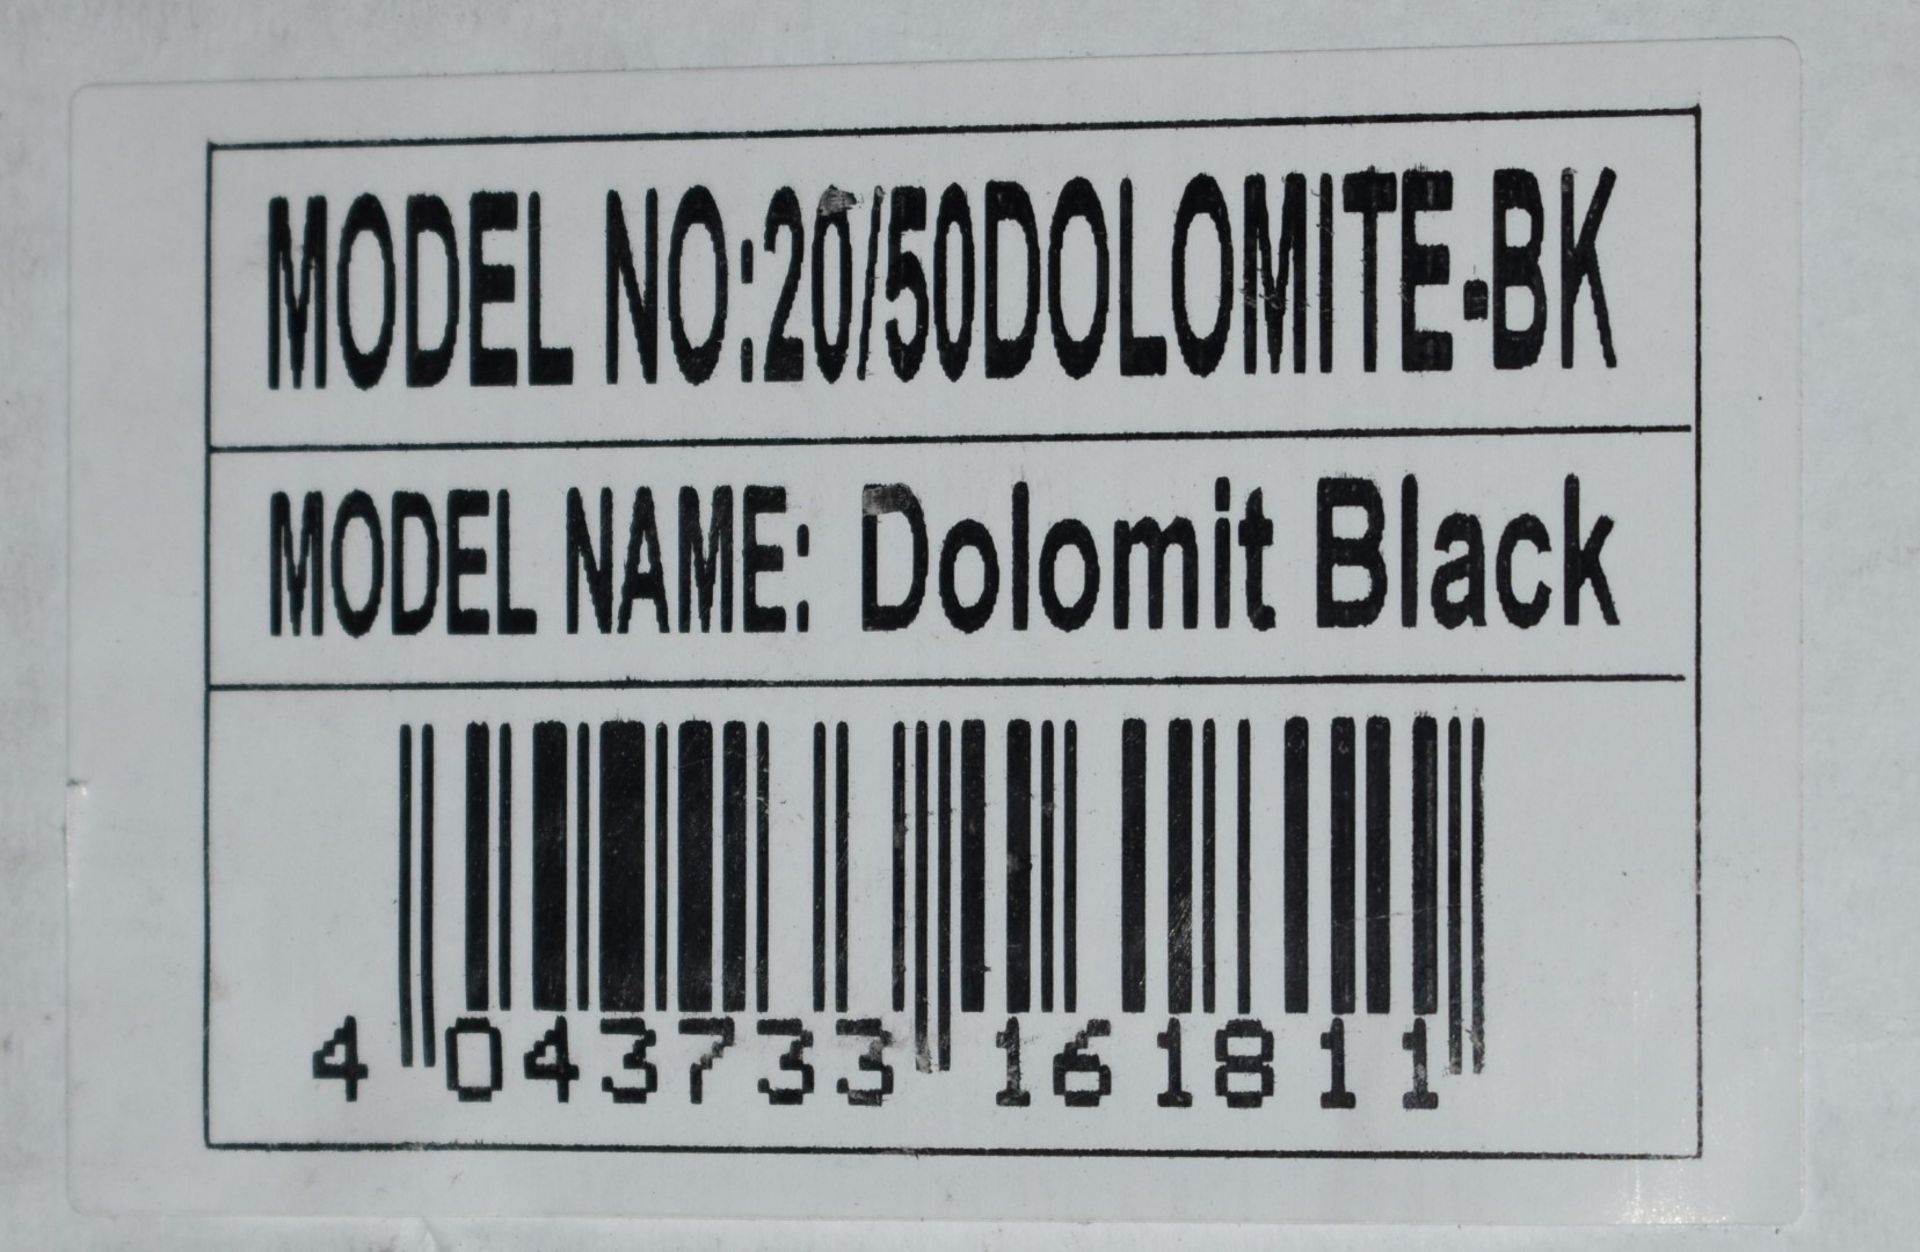 12 x Boxes of RAK Porcelain Floor or Wall Tiles - Dolomit Black - 20 x 50 cm Tiles Covering a - Image 8 of 9